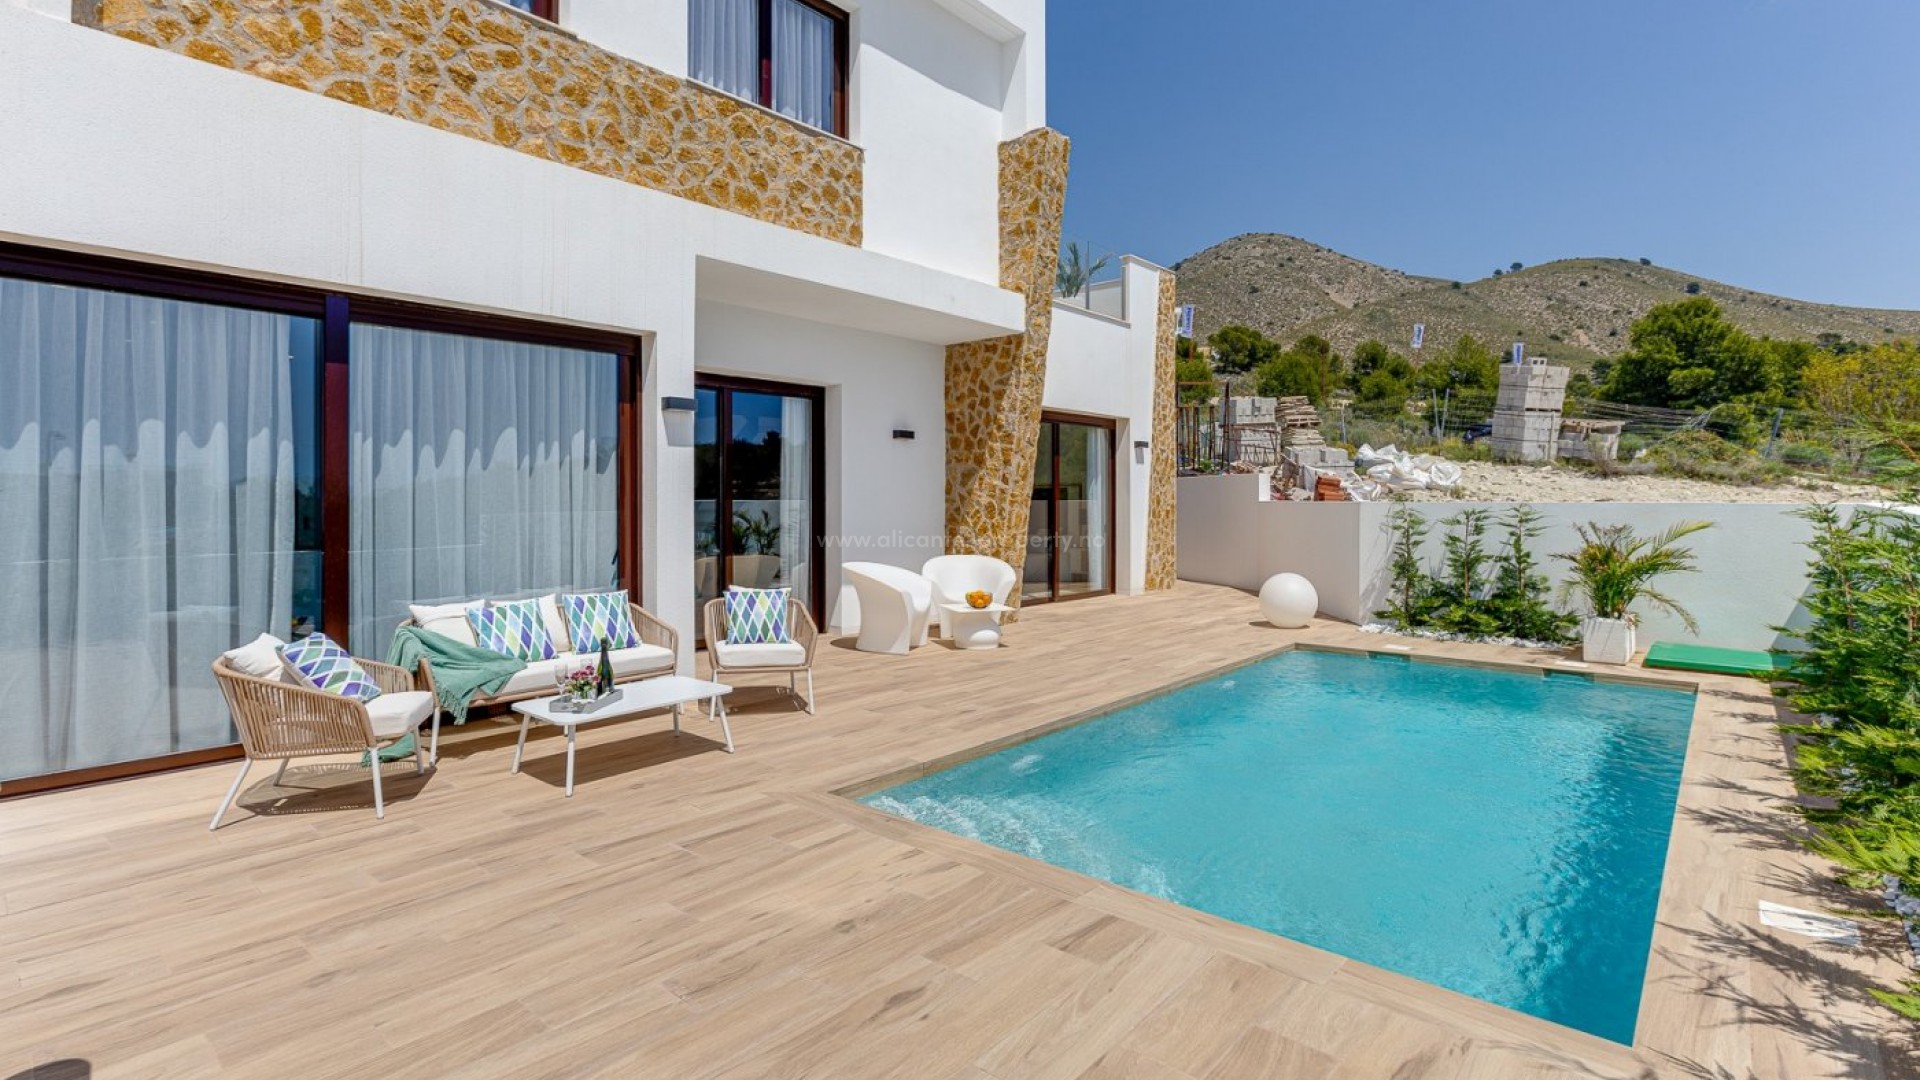 Villas in Balcon de Finestrat, 2 bedrooms and 2 bathrooms, terrace, garden, private pool and parking. 10 minutes from Benidorm and only 2 km from Finestrat.